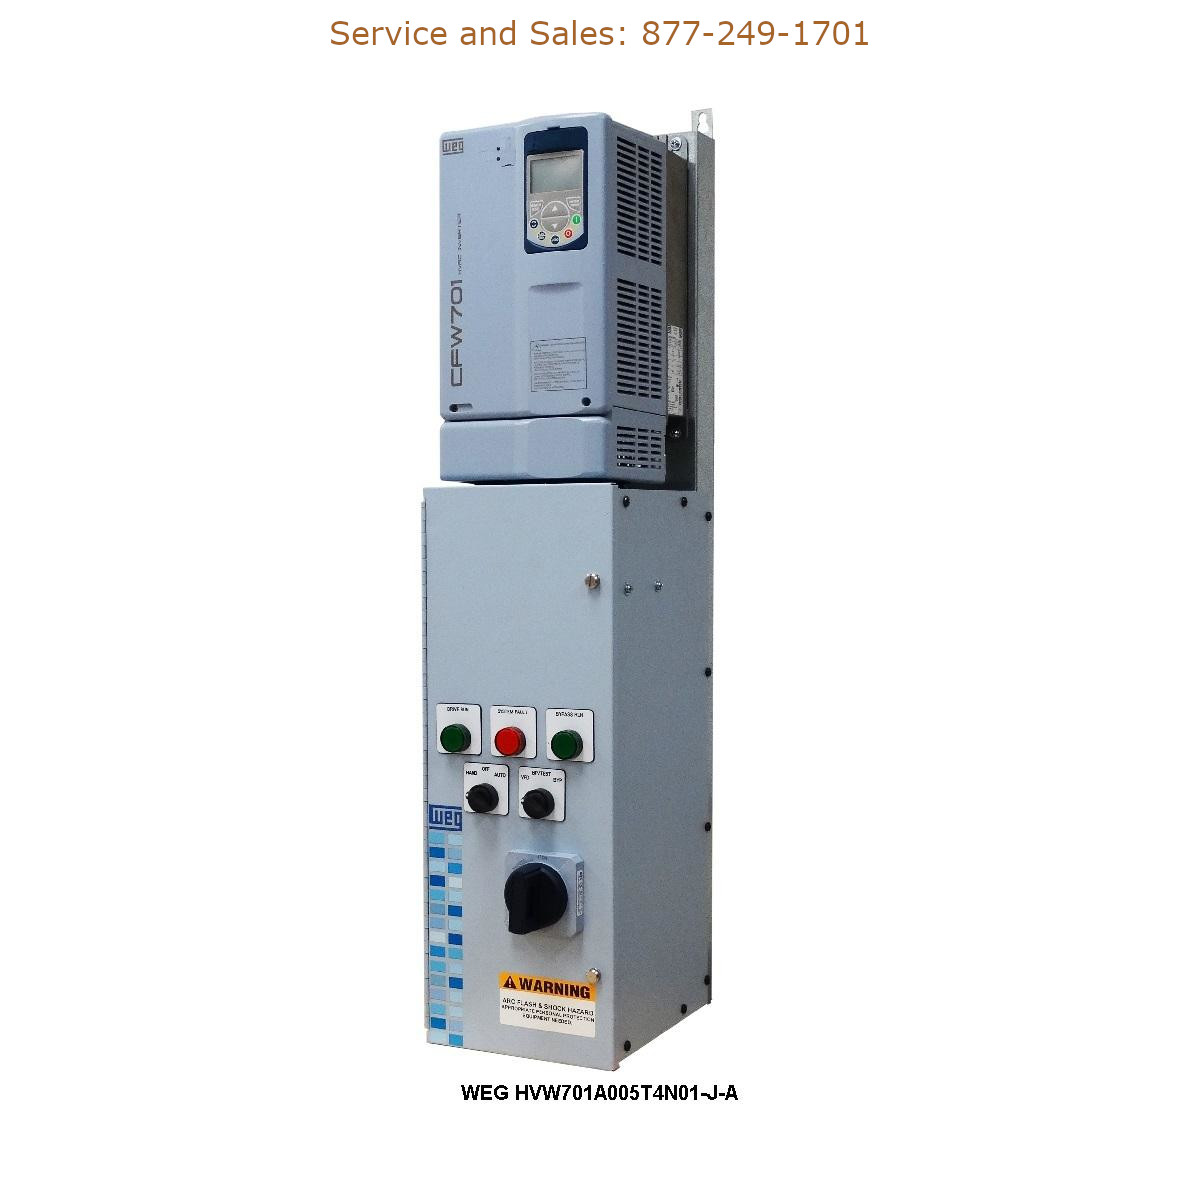 WEG HVW701A005T4N01-J-A WEG Model Number HVW701A005T4N01-J-A WEG Drives, Variable Speed Drives Repair Service, Troubleshooting, Replacement Parts https://gesrepair.com/wp-content/uploads/2022/WEG/WEG_HVW701A005T4N01-J-A_Drives_Variable_Speed_Drives.jpg